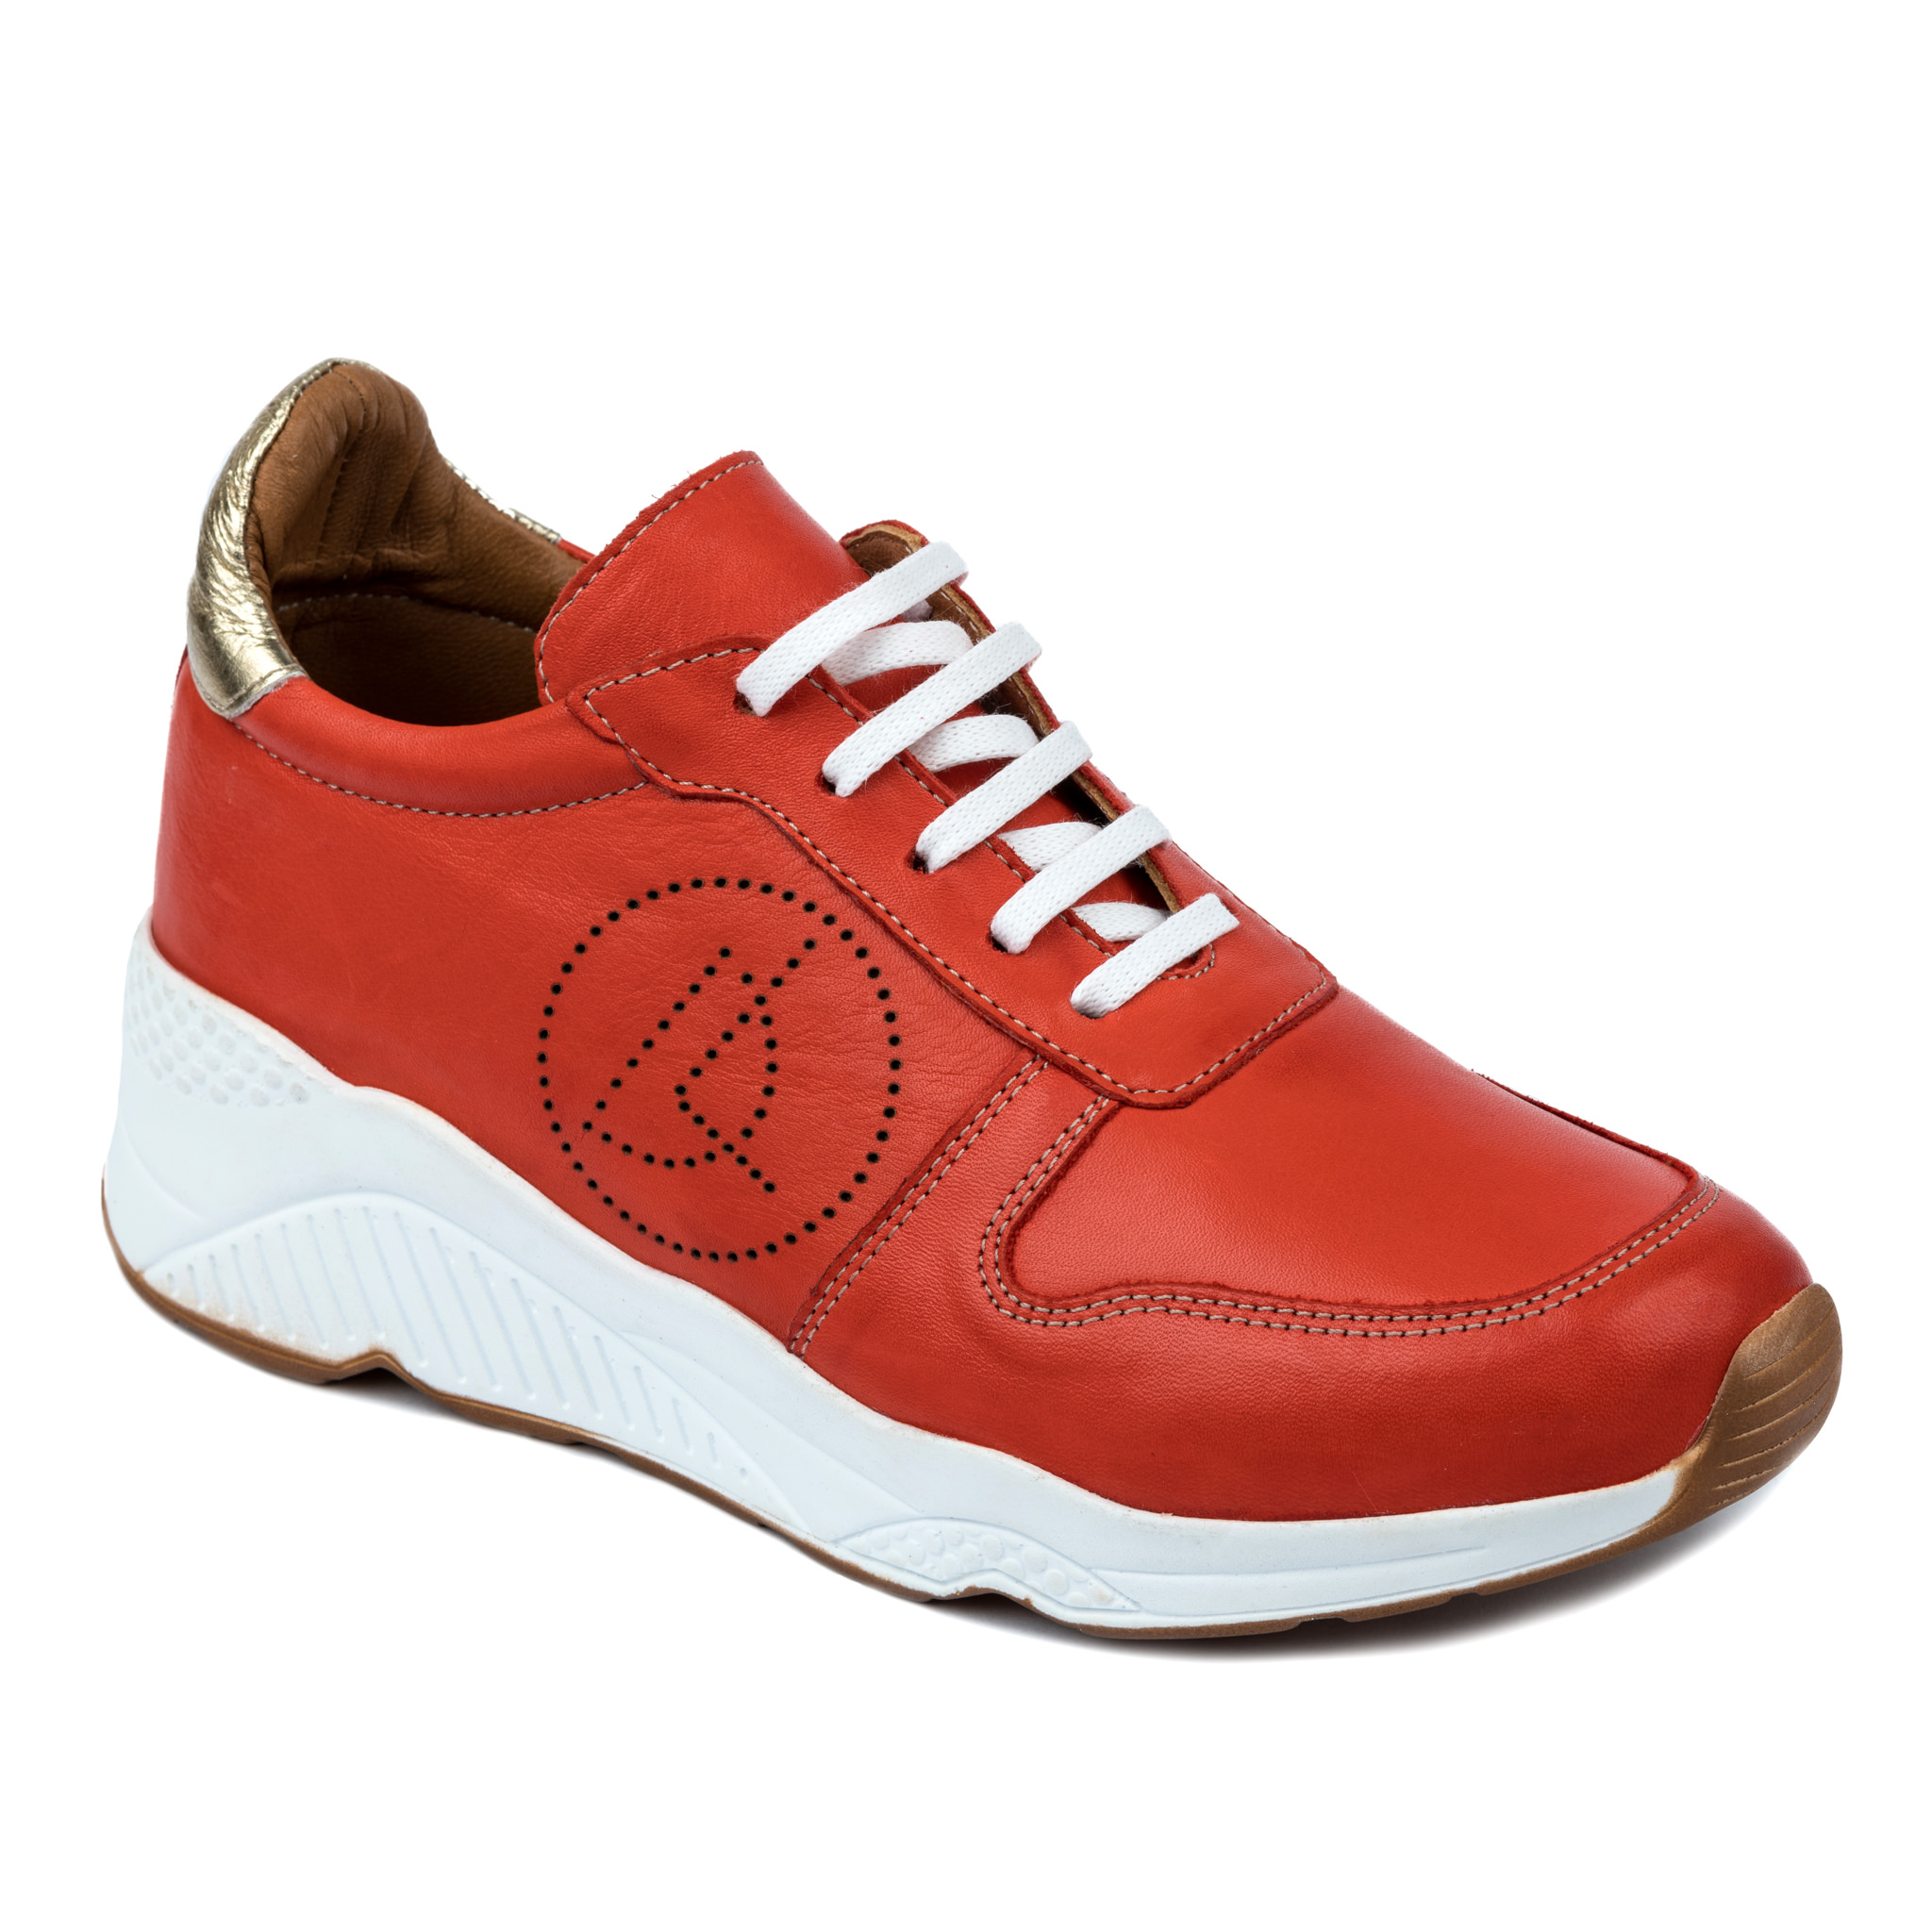 Leather sneakers A543 - ORANGE